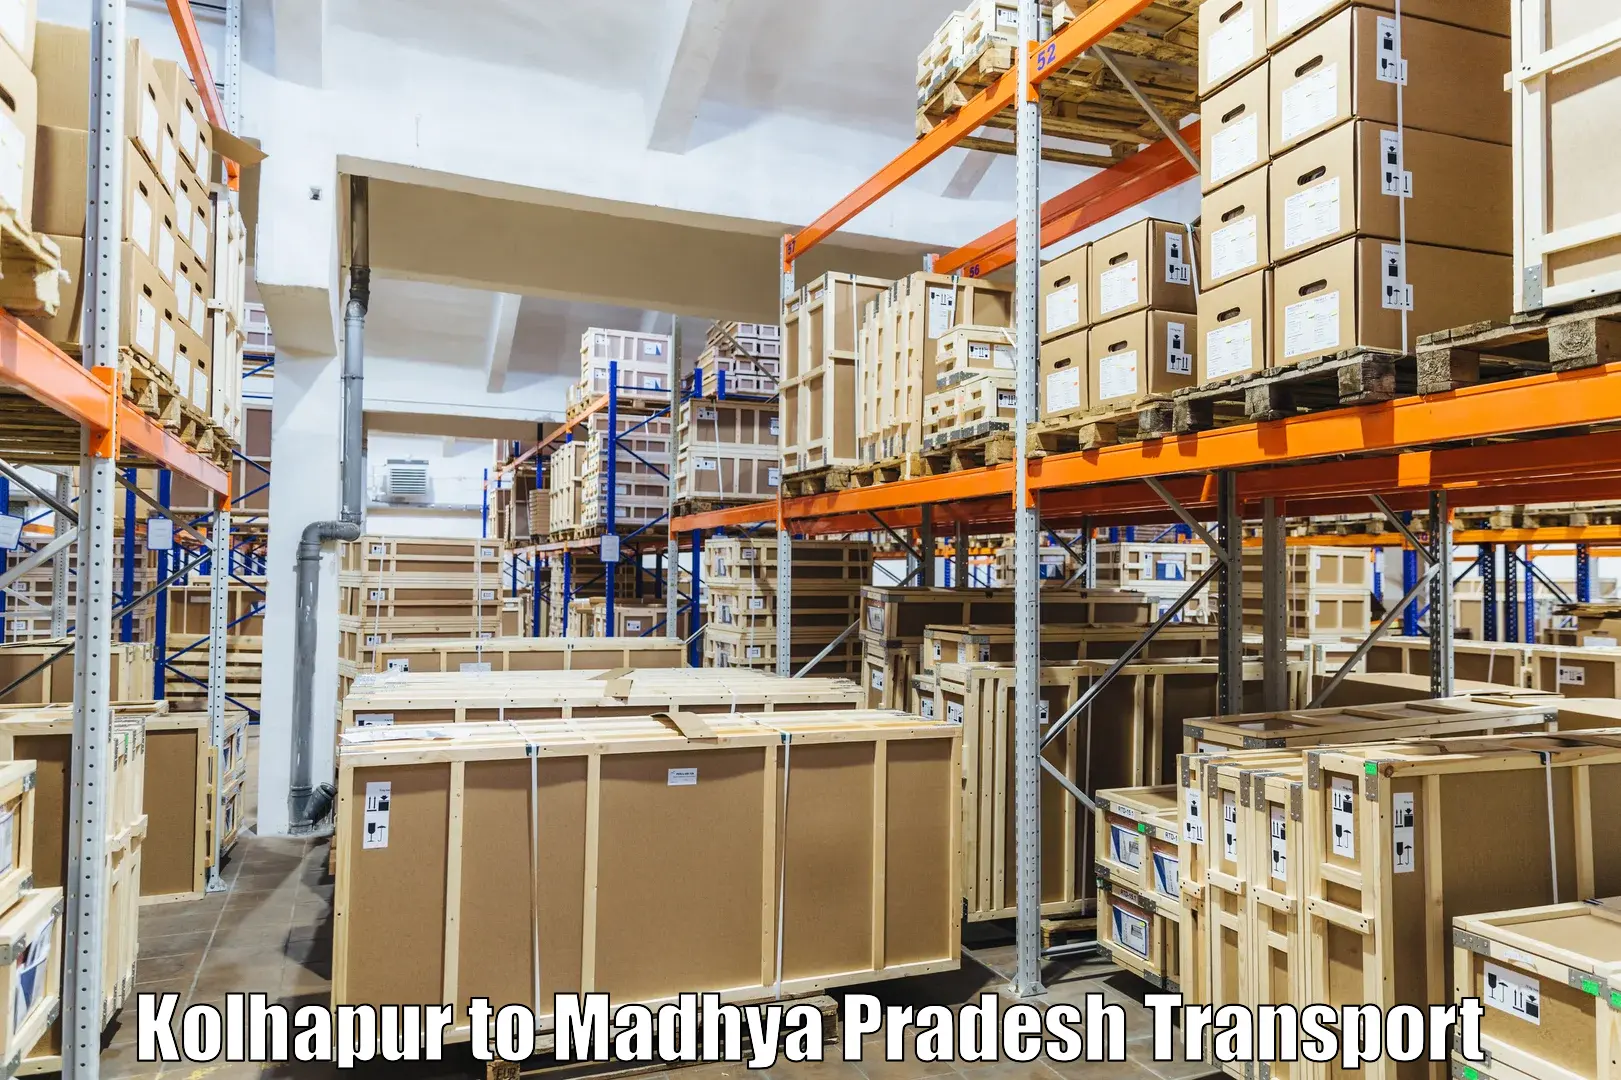 Truck transport companies in India Kolhapur to Pithampur